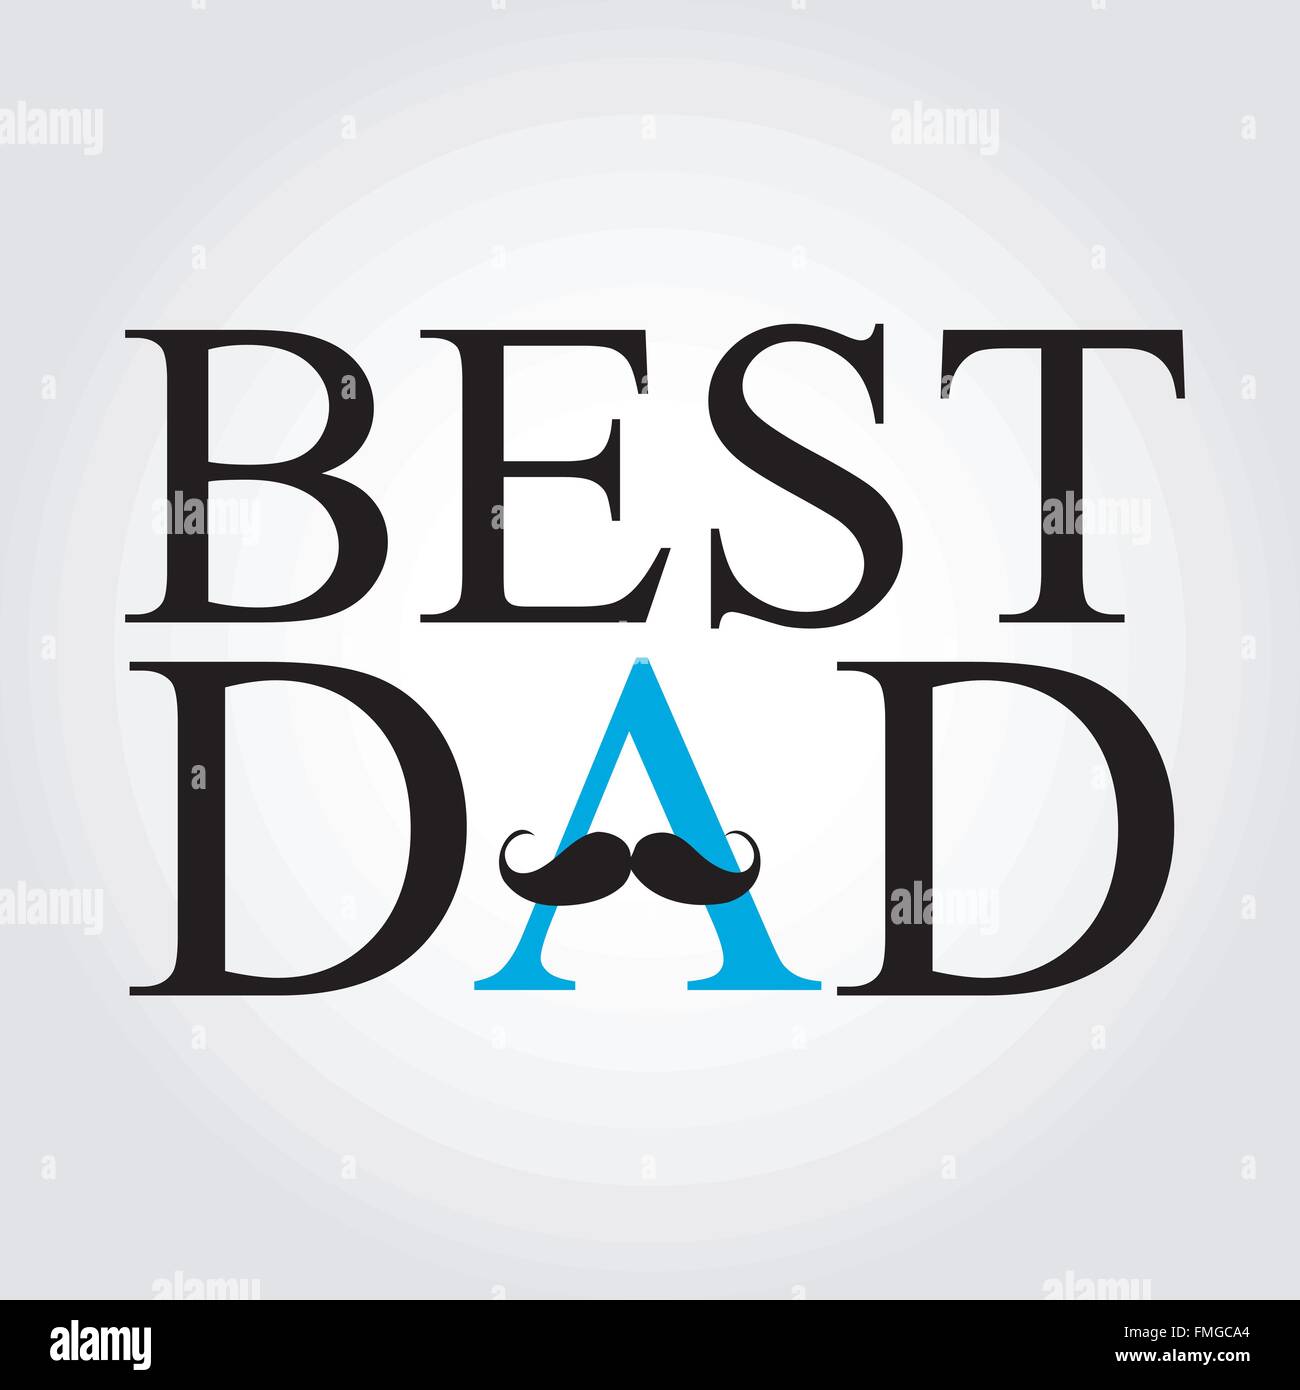 Best Dad with a mustache over A Stock Vector